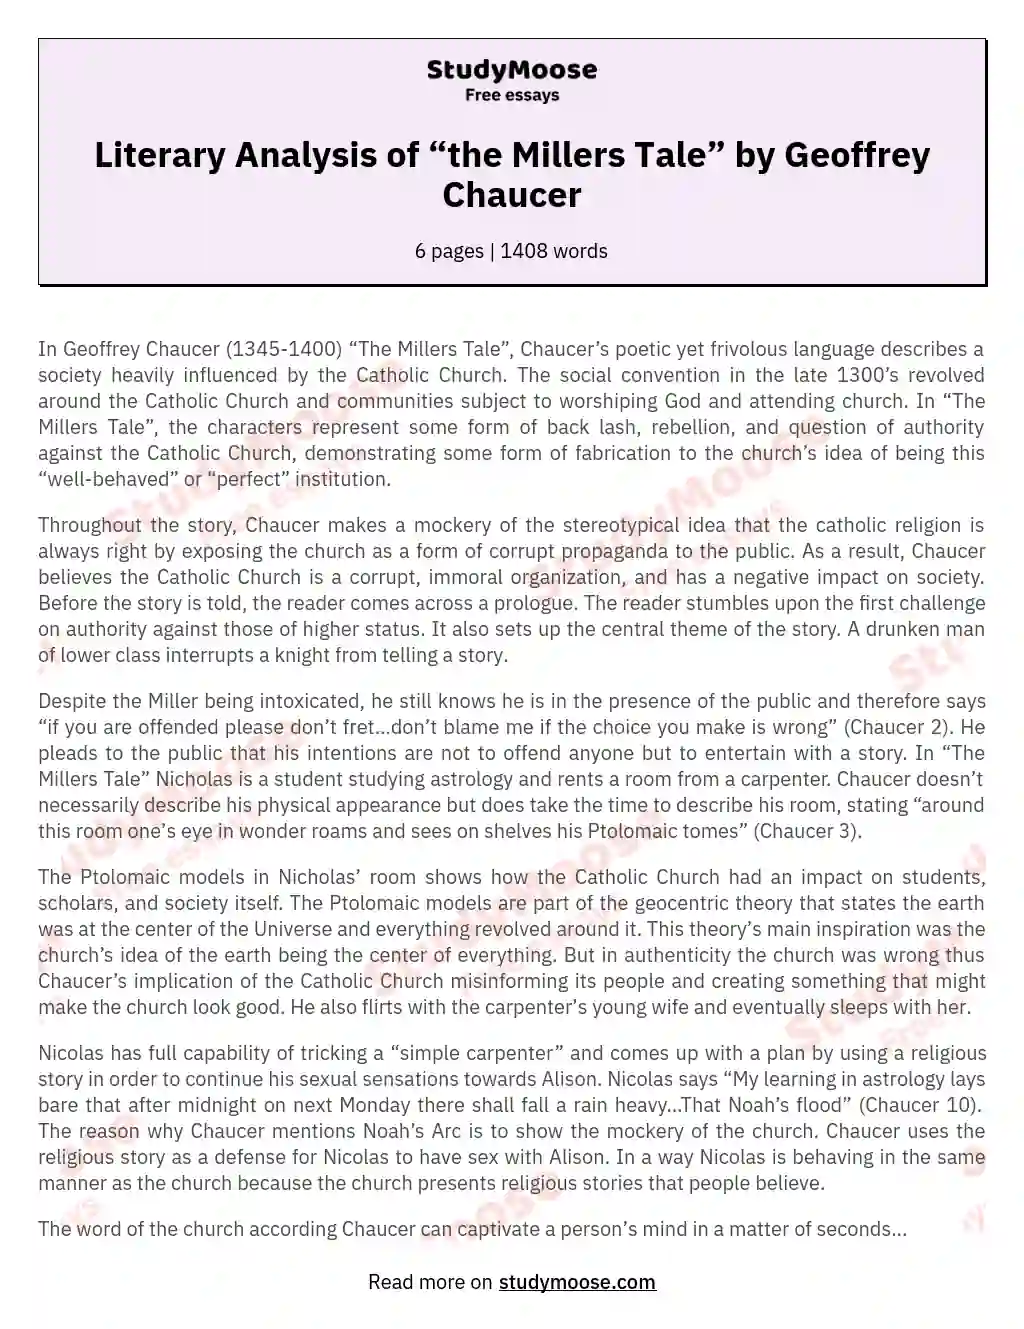 Literary Analysis of “the Millers Tale” by Geoffrey Chaucer